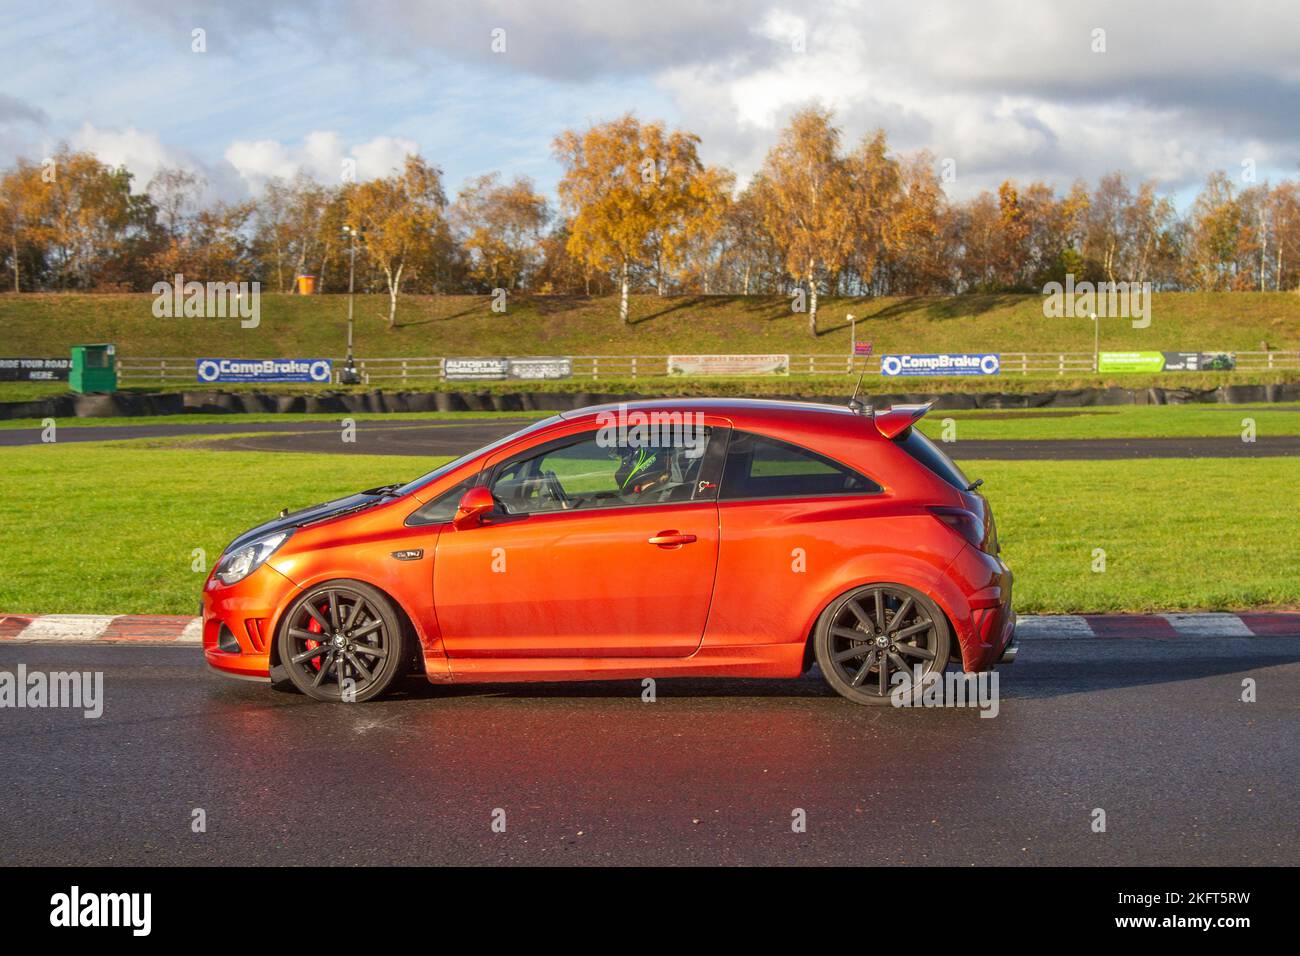 2012 Orange Vauxhall Corsa Vxr Nurburgring Edition 1.6T 205 driving on challenging high-speed and technical low-geared corners of the Three sisters race circuit near Wigan, UK Stock Photo